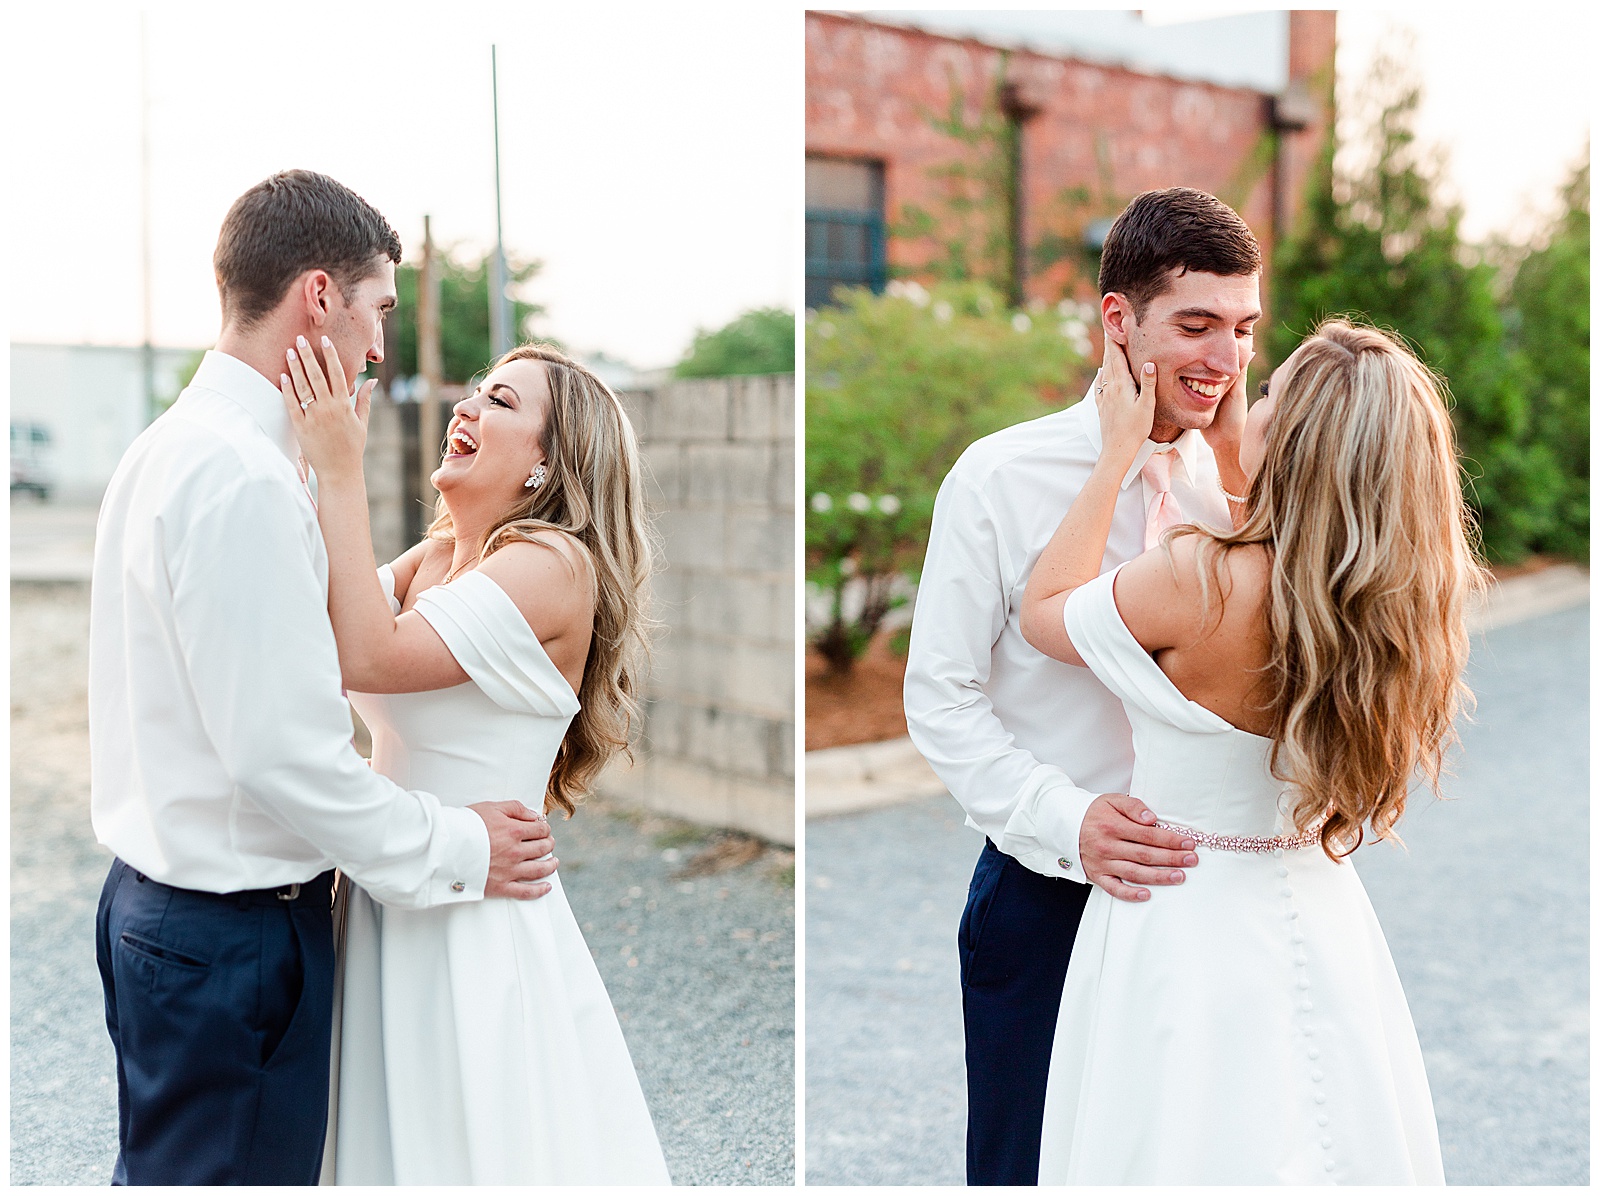 Stunning Modern Bride and Groom with off shoulder wedding dress and blue suit in outdoor portraits in empty parking lot from Summer Wedding in Charlotte, NC | Check out the full wedding at KevynDixonPhoto.com